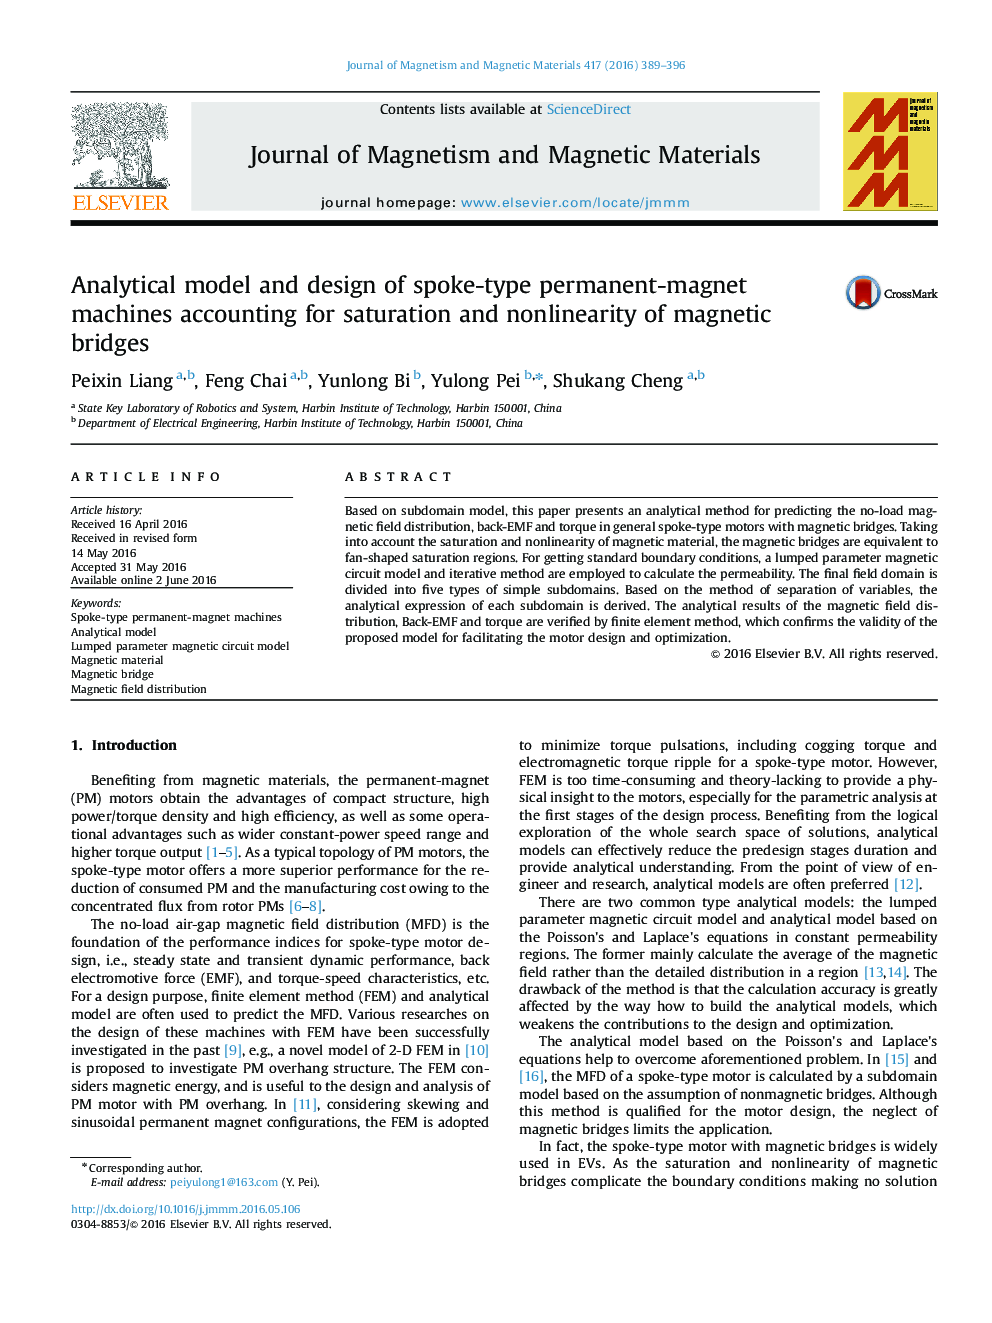 Analytical model and design of spoke-type permanent-magnet machines accounting for saturation and nonlinearity of magnetic bridges